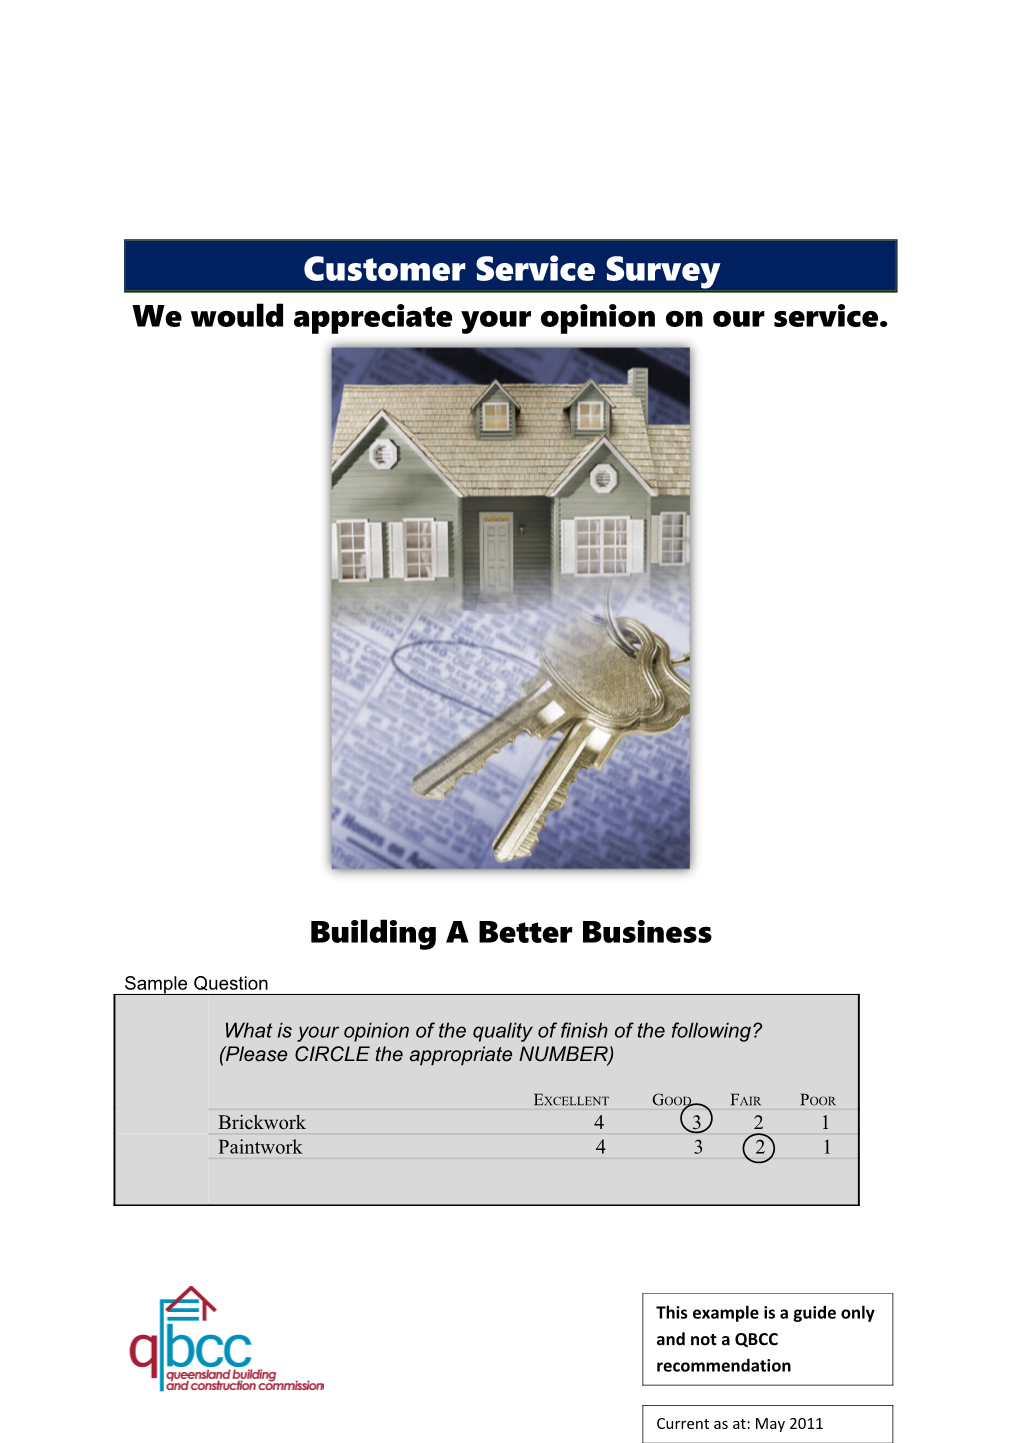 We Would Appreciate Your Opinion on Our Service